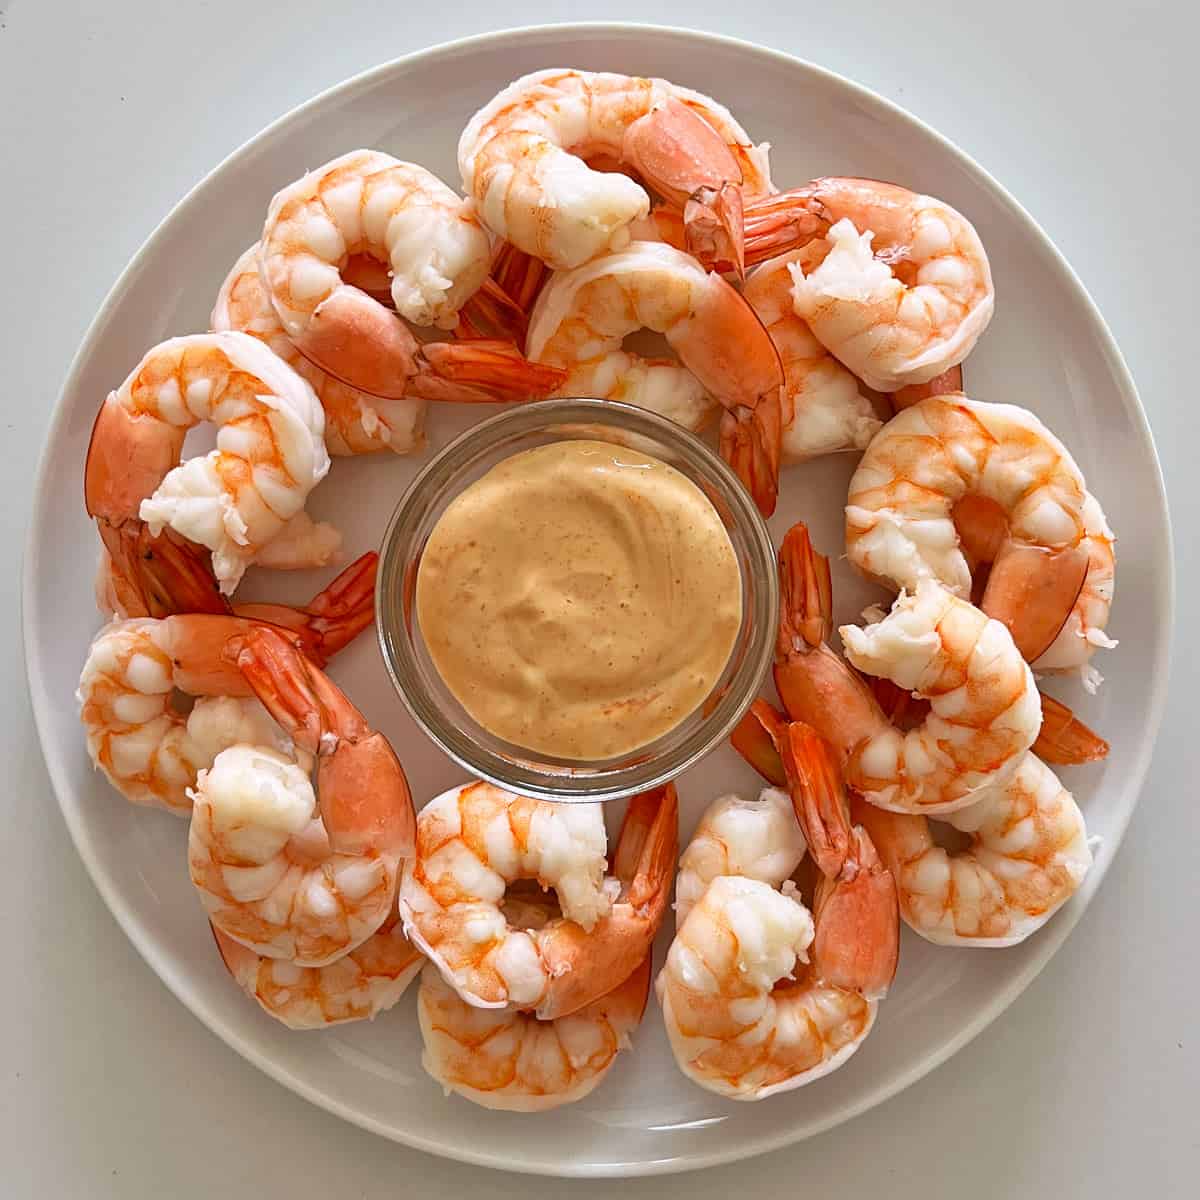 Boiled shrimp are served with sriracha mayo.